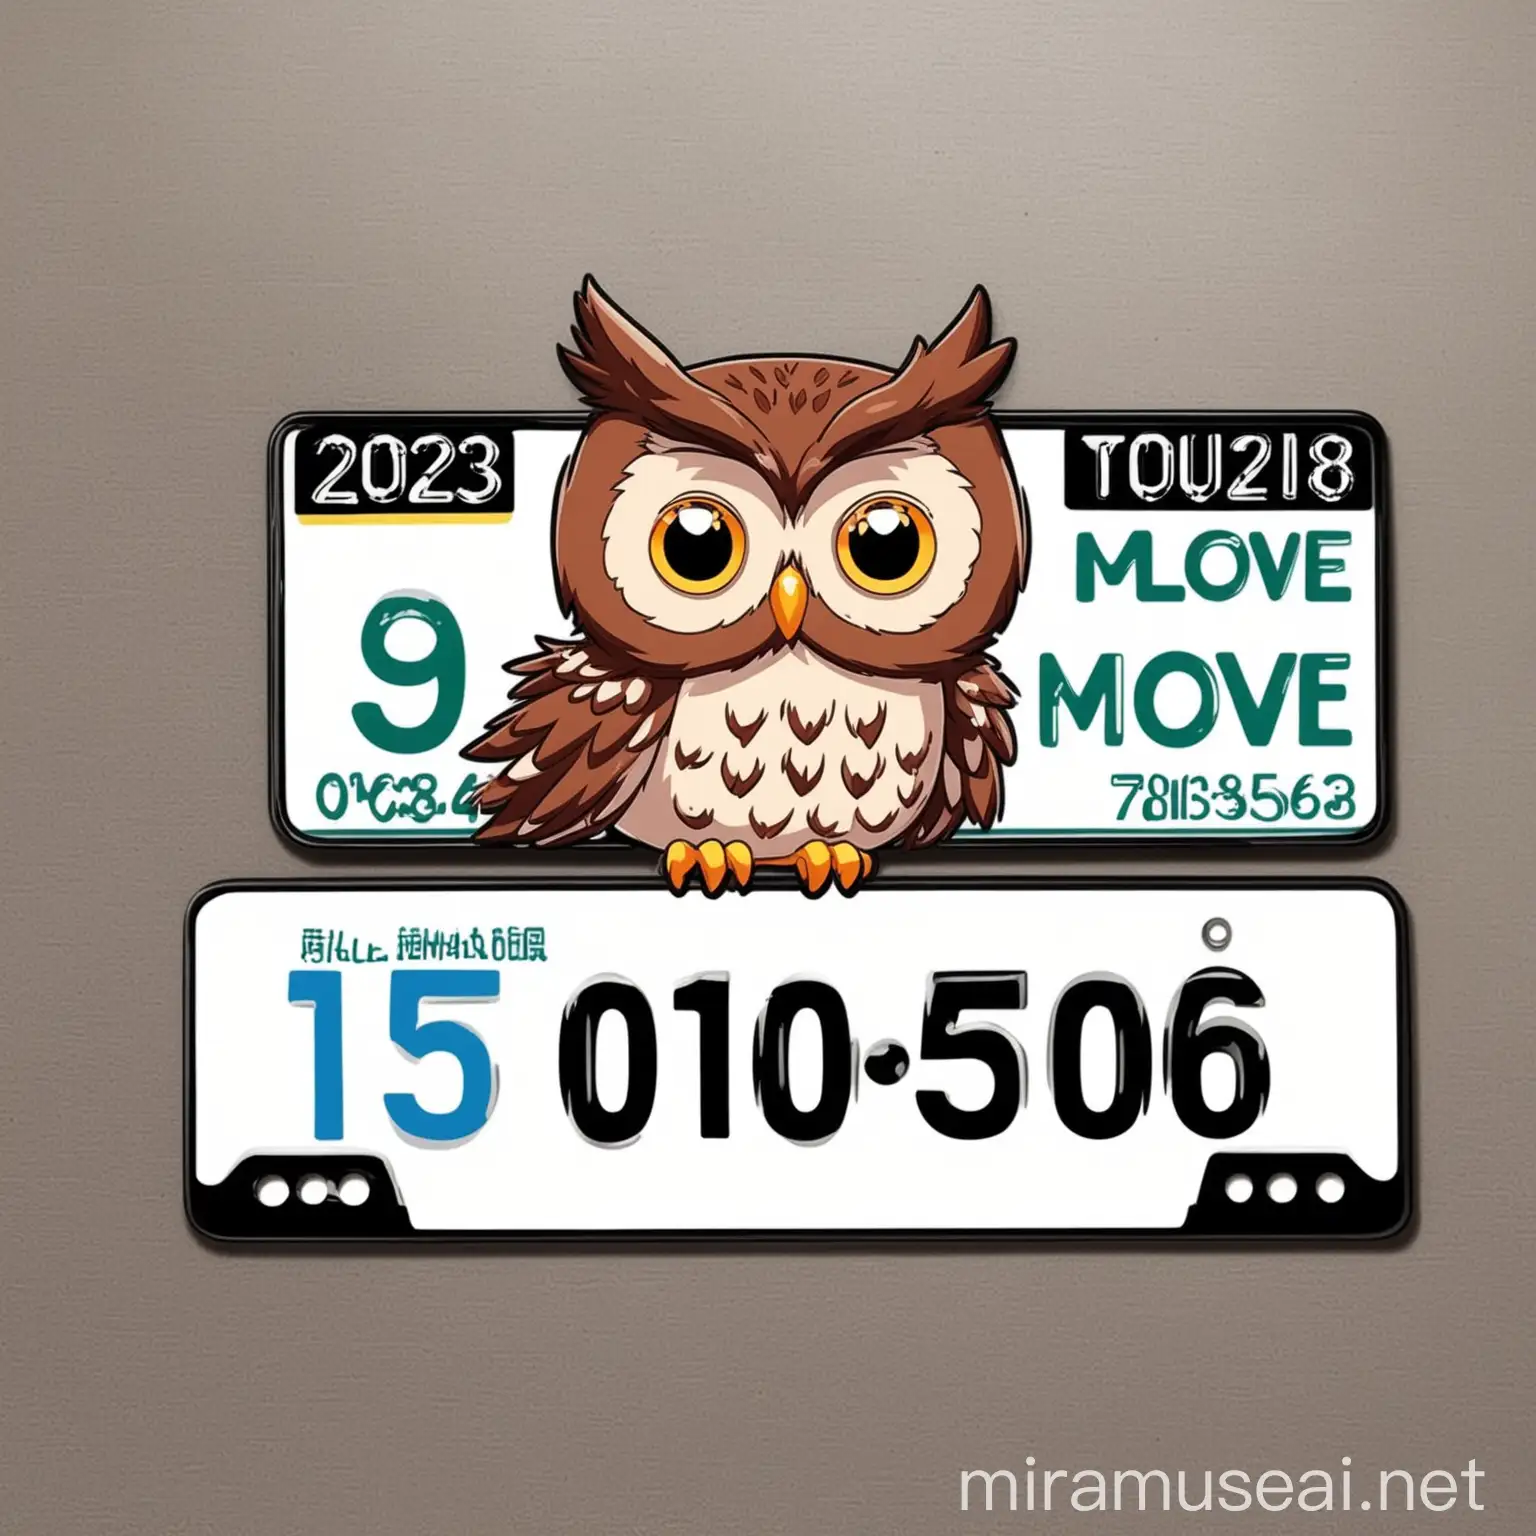 Cheerful Cartoon Owl Driving a Car with a Unique Phone Number Plate